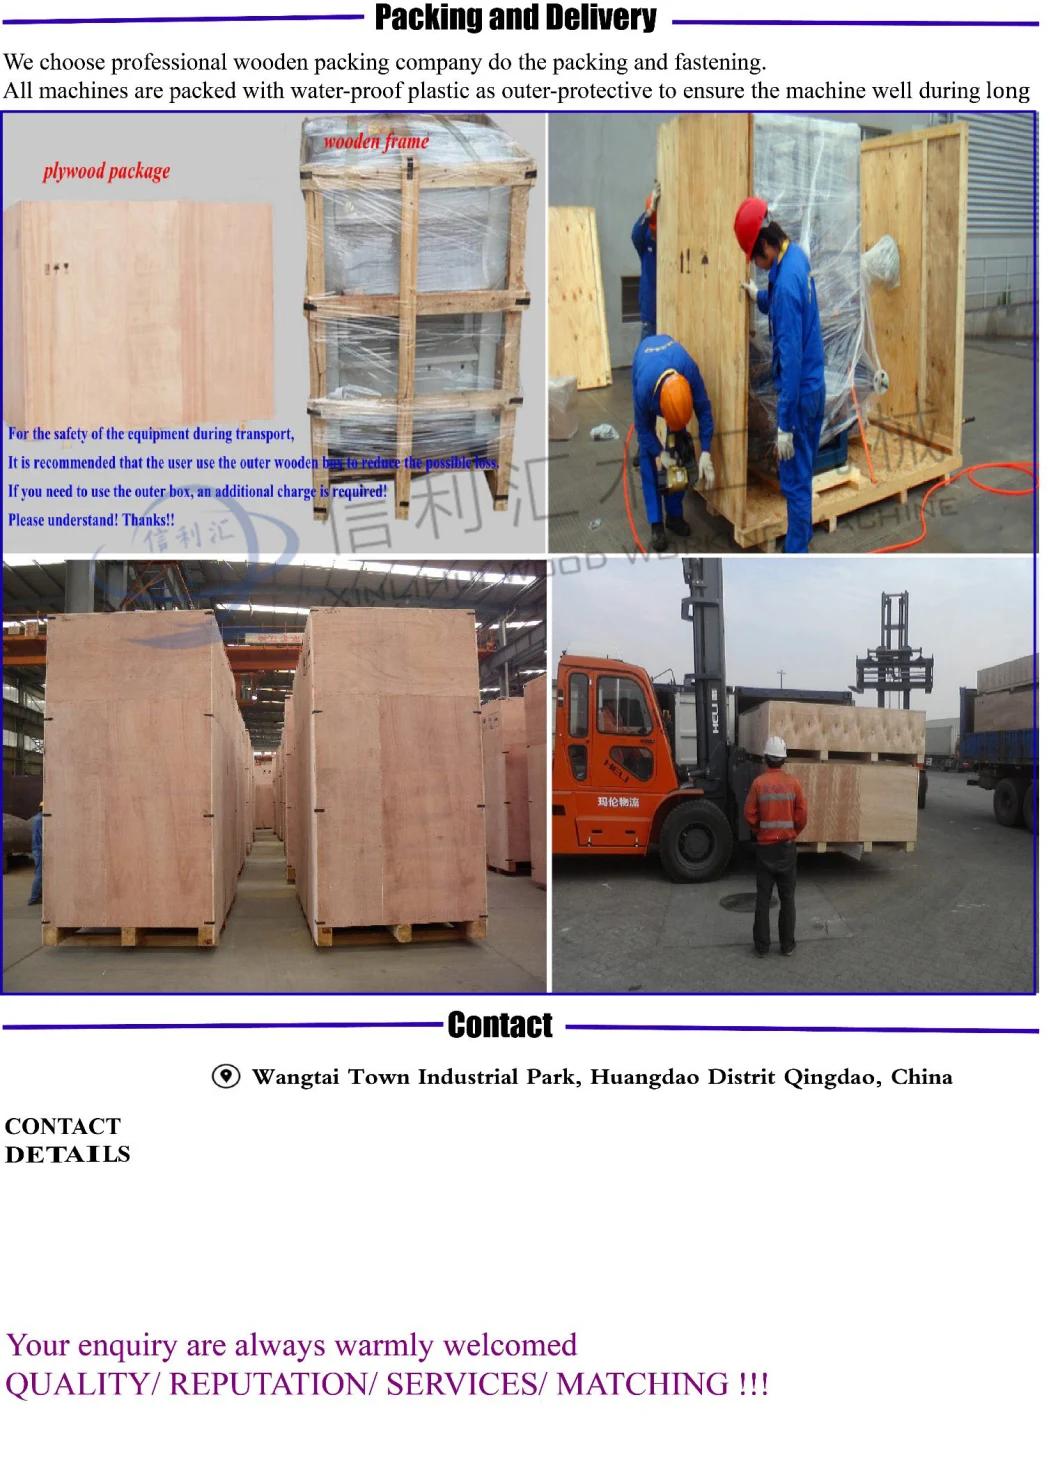 Plywiid Enge Machines Plywood Sheet Cutting Machines, Plywood Enge Machines, Sezionatrice for Ply Wood in China